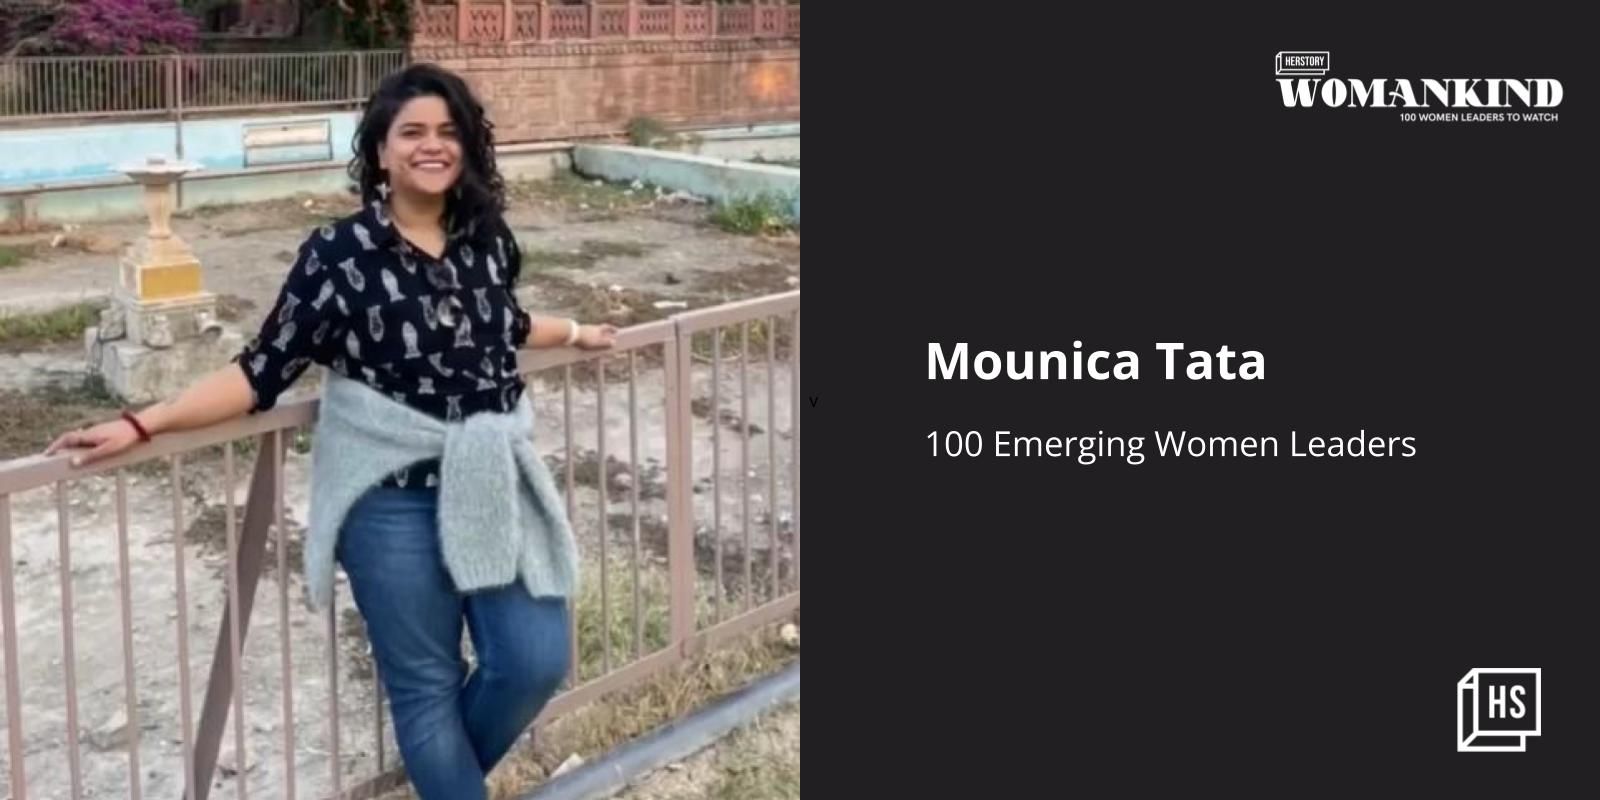 [100 Emerging Women Leaders] Meet Mounica Tata, who is highlighting crucial issues through illustrations 
